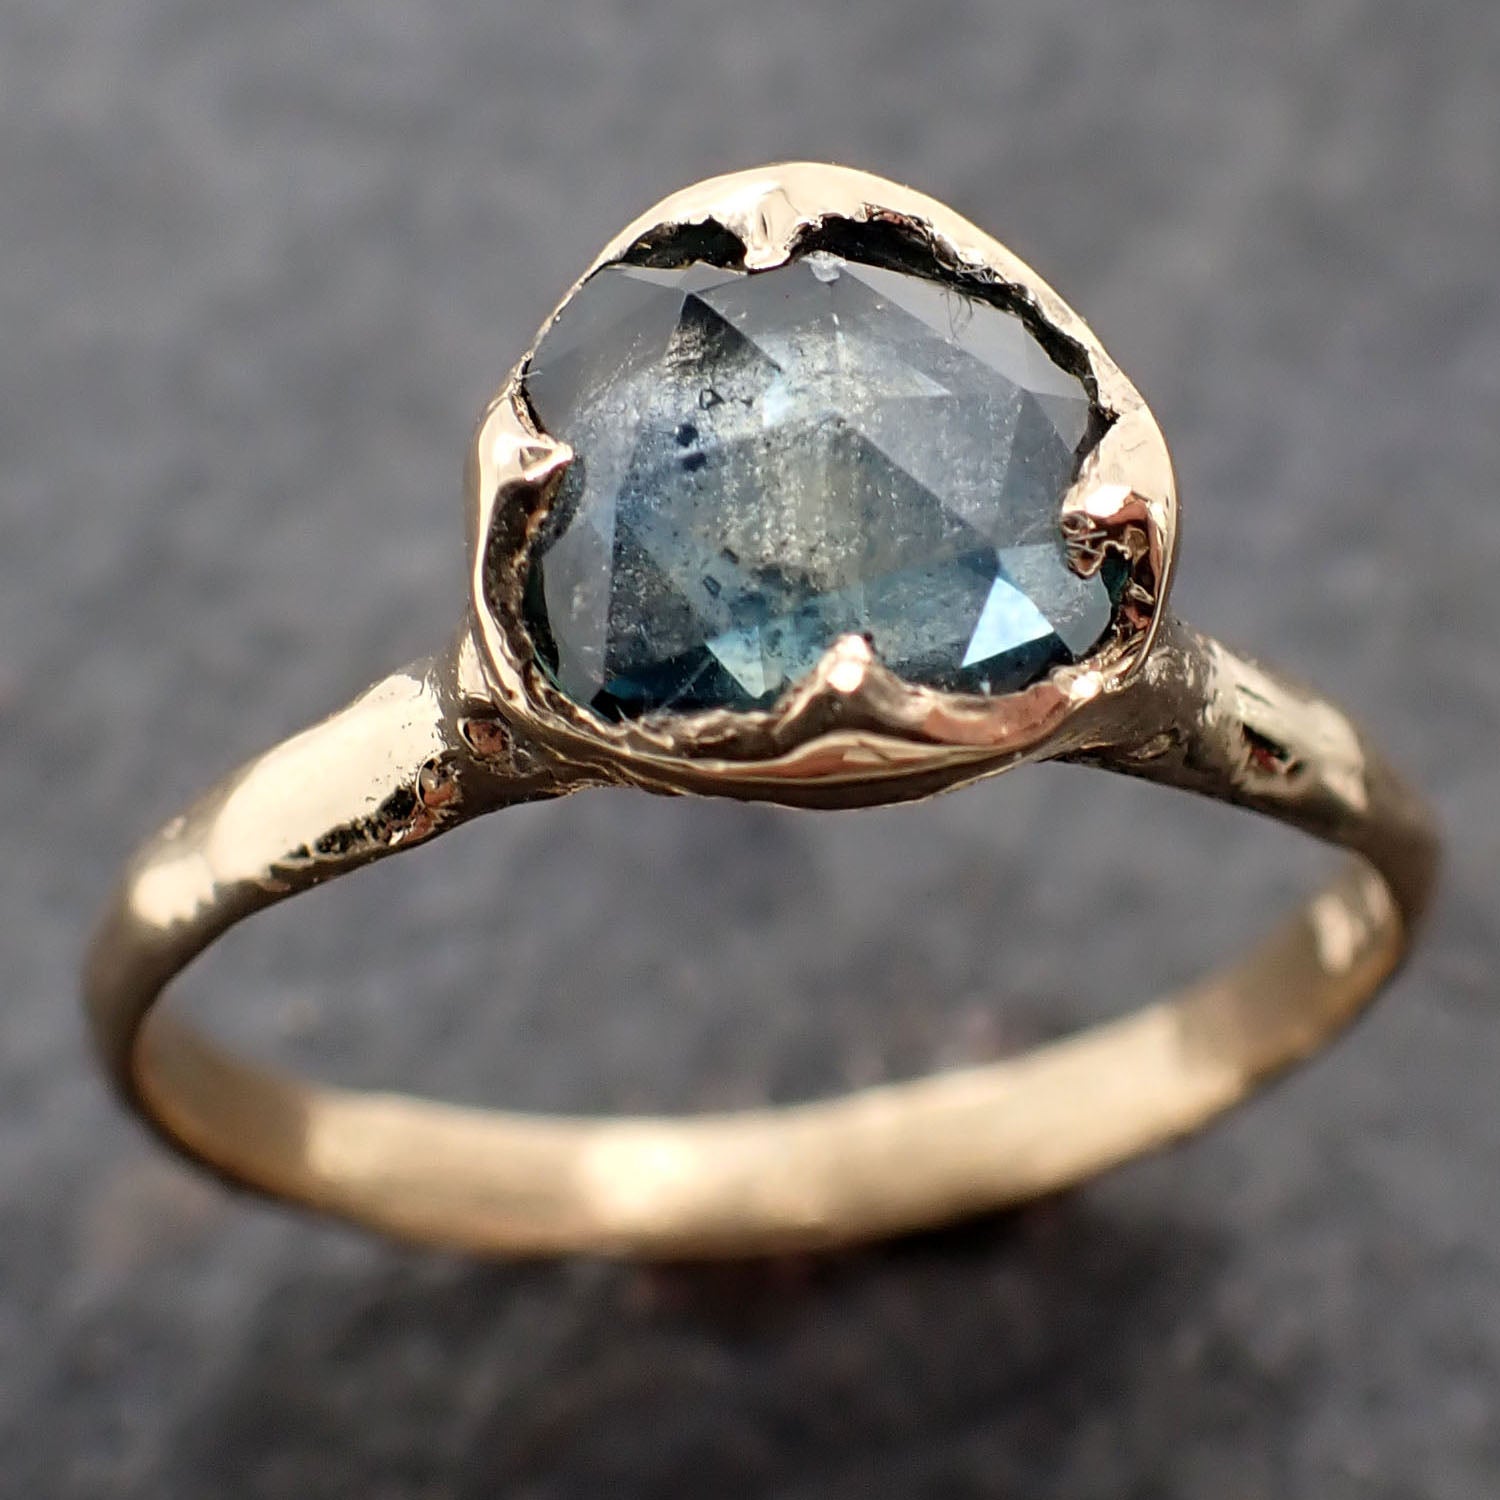 fancy cut montana blue sapphire 18k yellow gold solitaire ring gold gemstone engagement ring 2614 Alternative Engagement